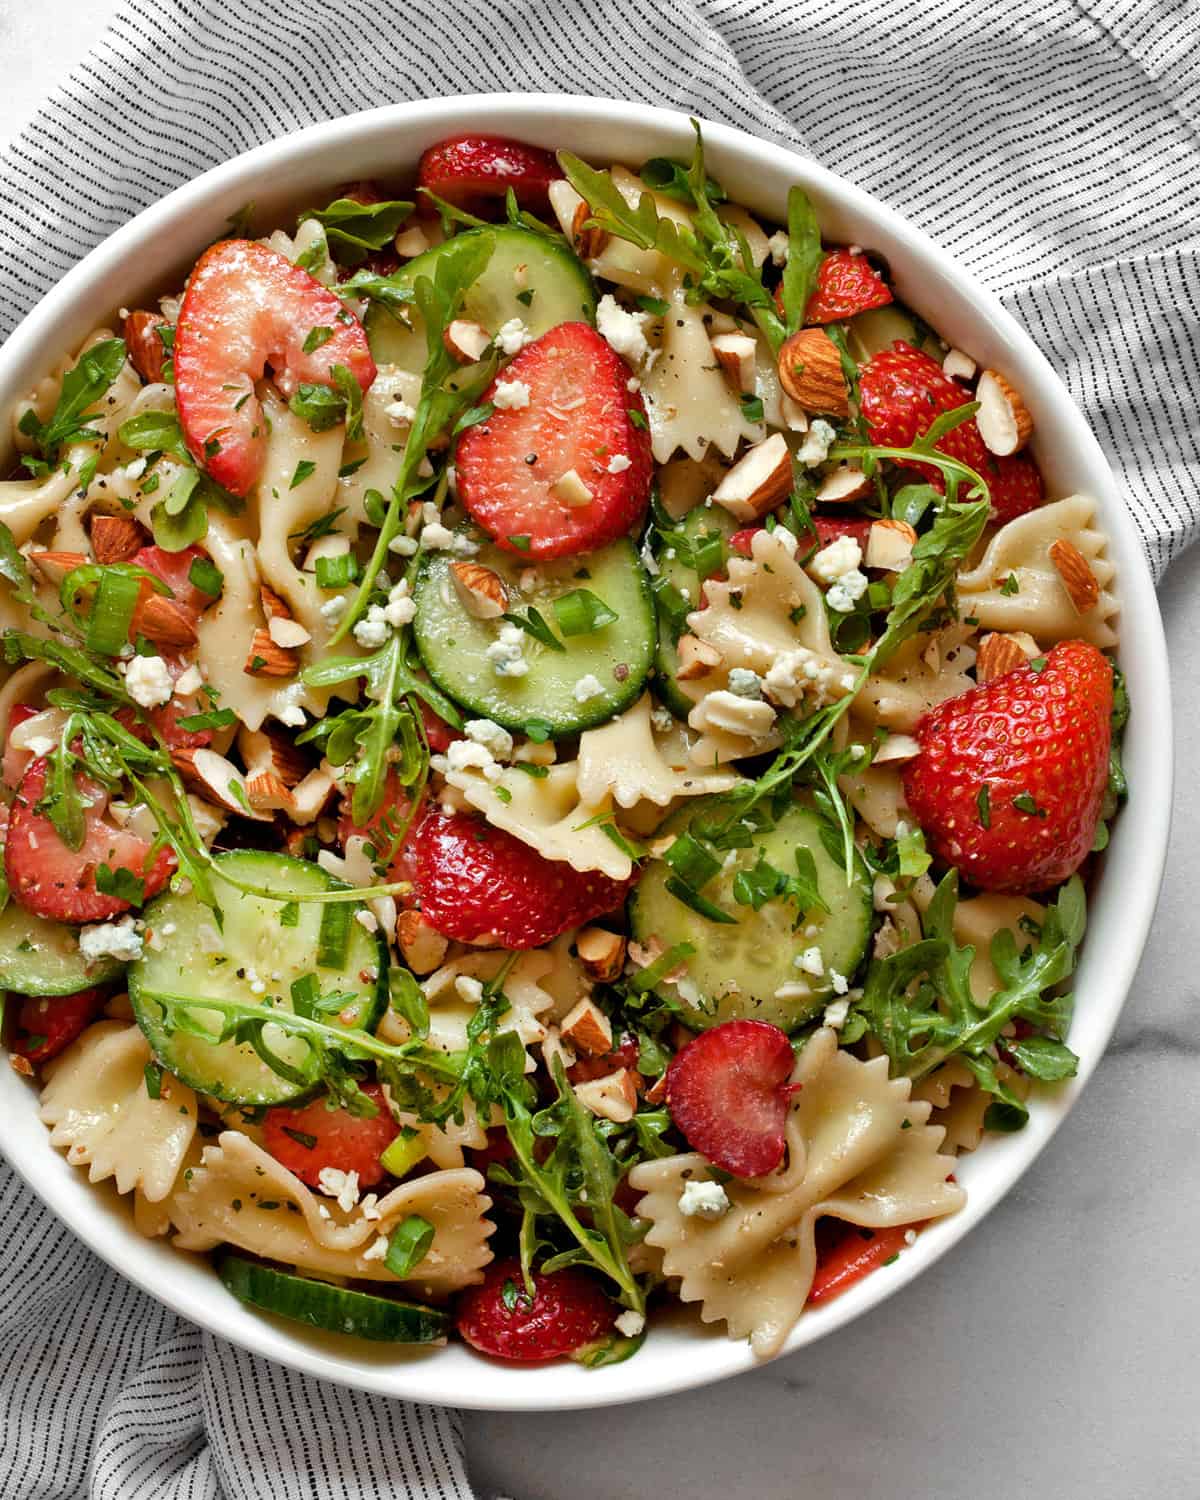 Cucumber pasta salad with strawberries and almonds in a bowl.